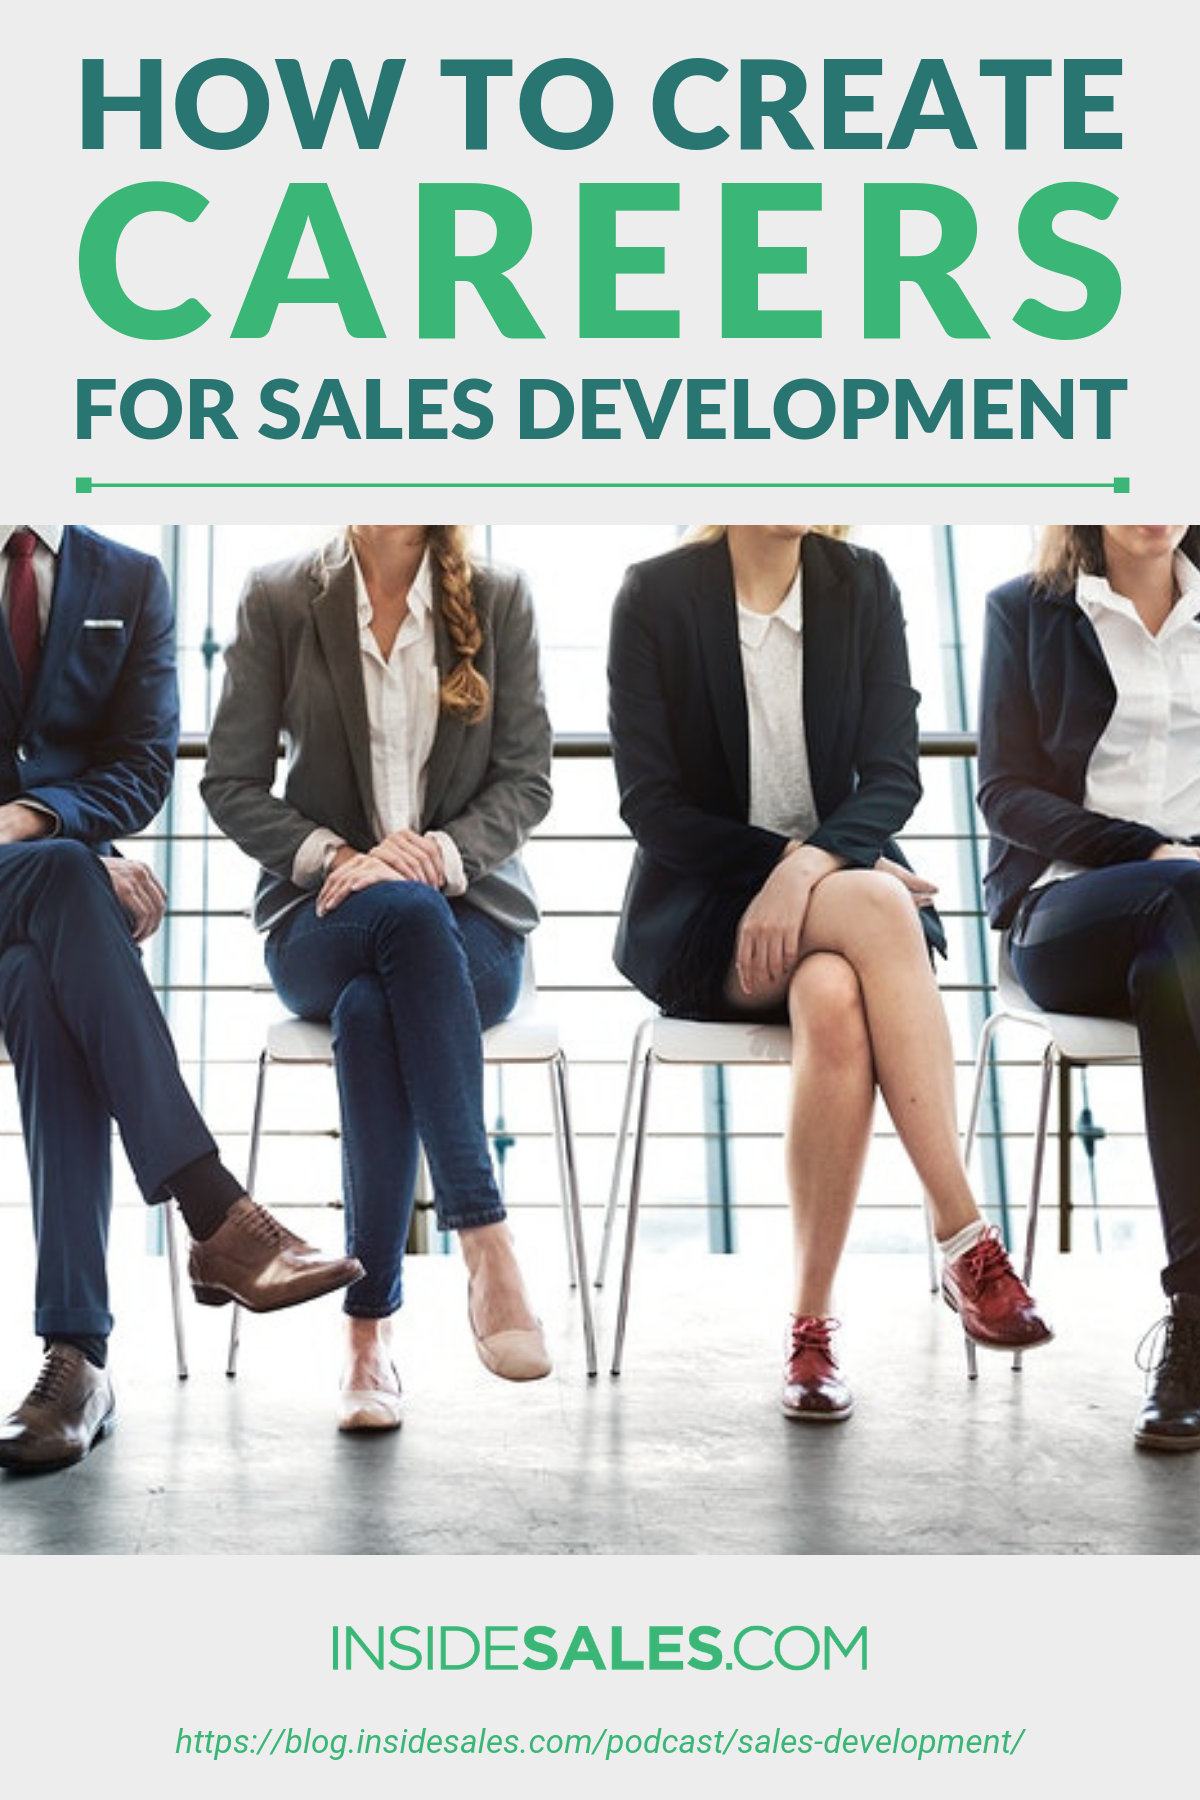 How To Create Careers For Sales Development https://resources.insidesales.com/blog/podcast/sales-development/